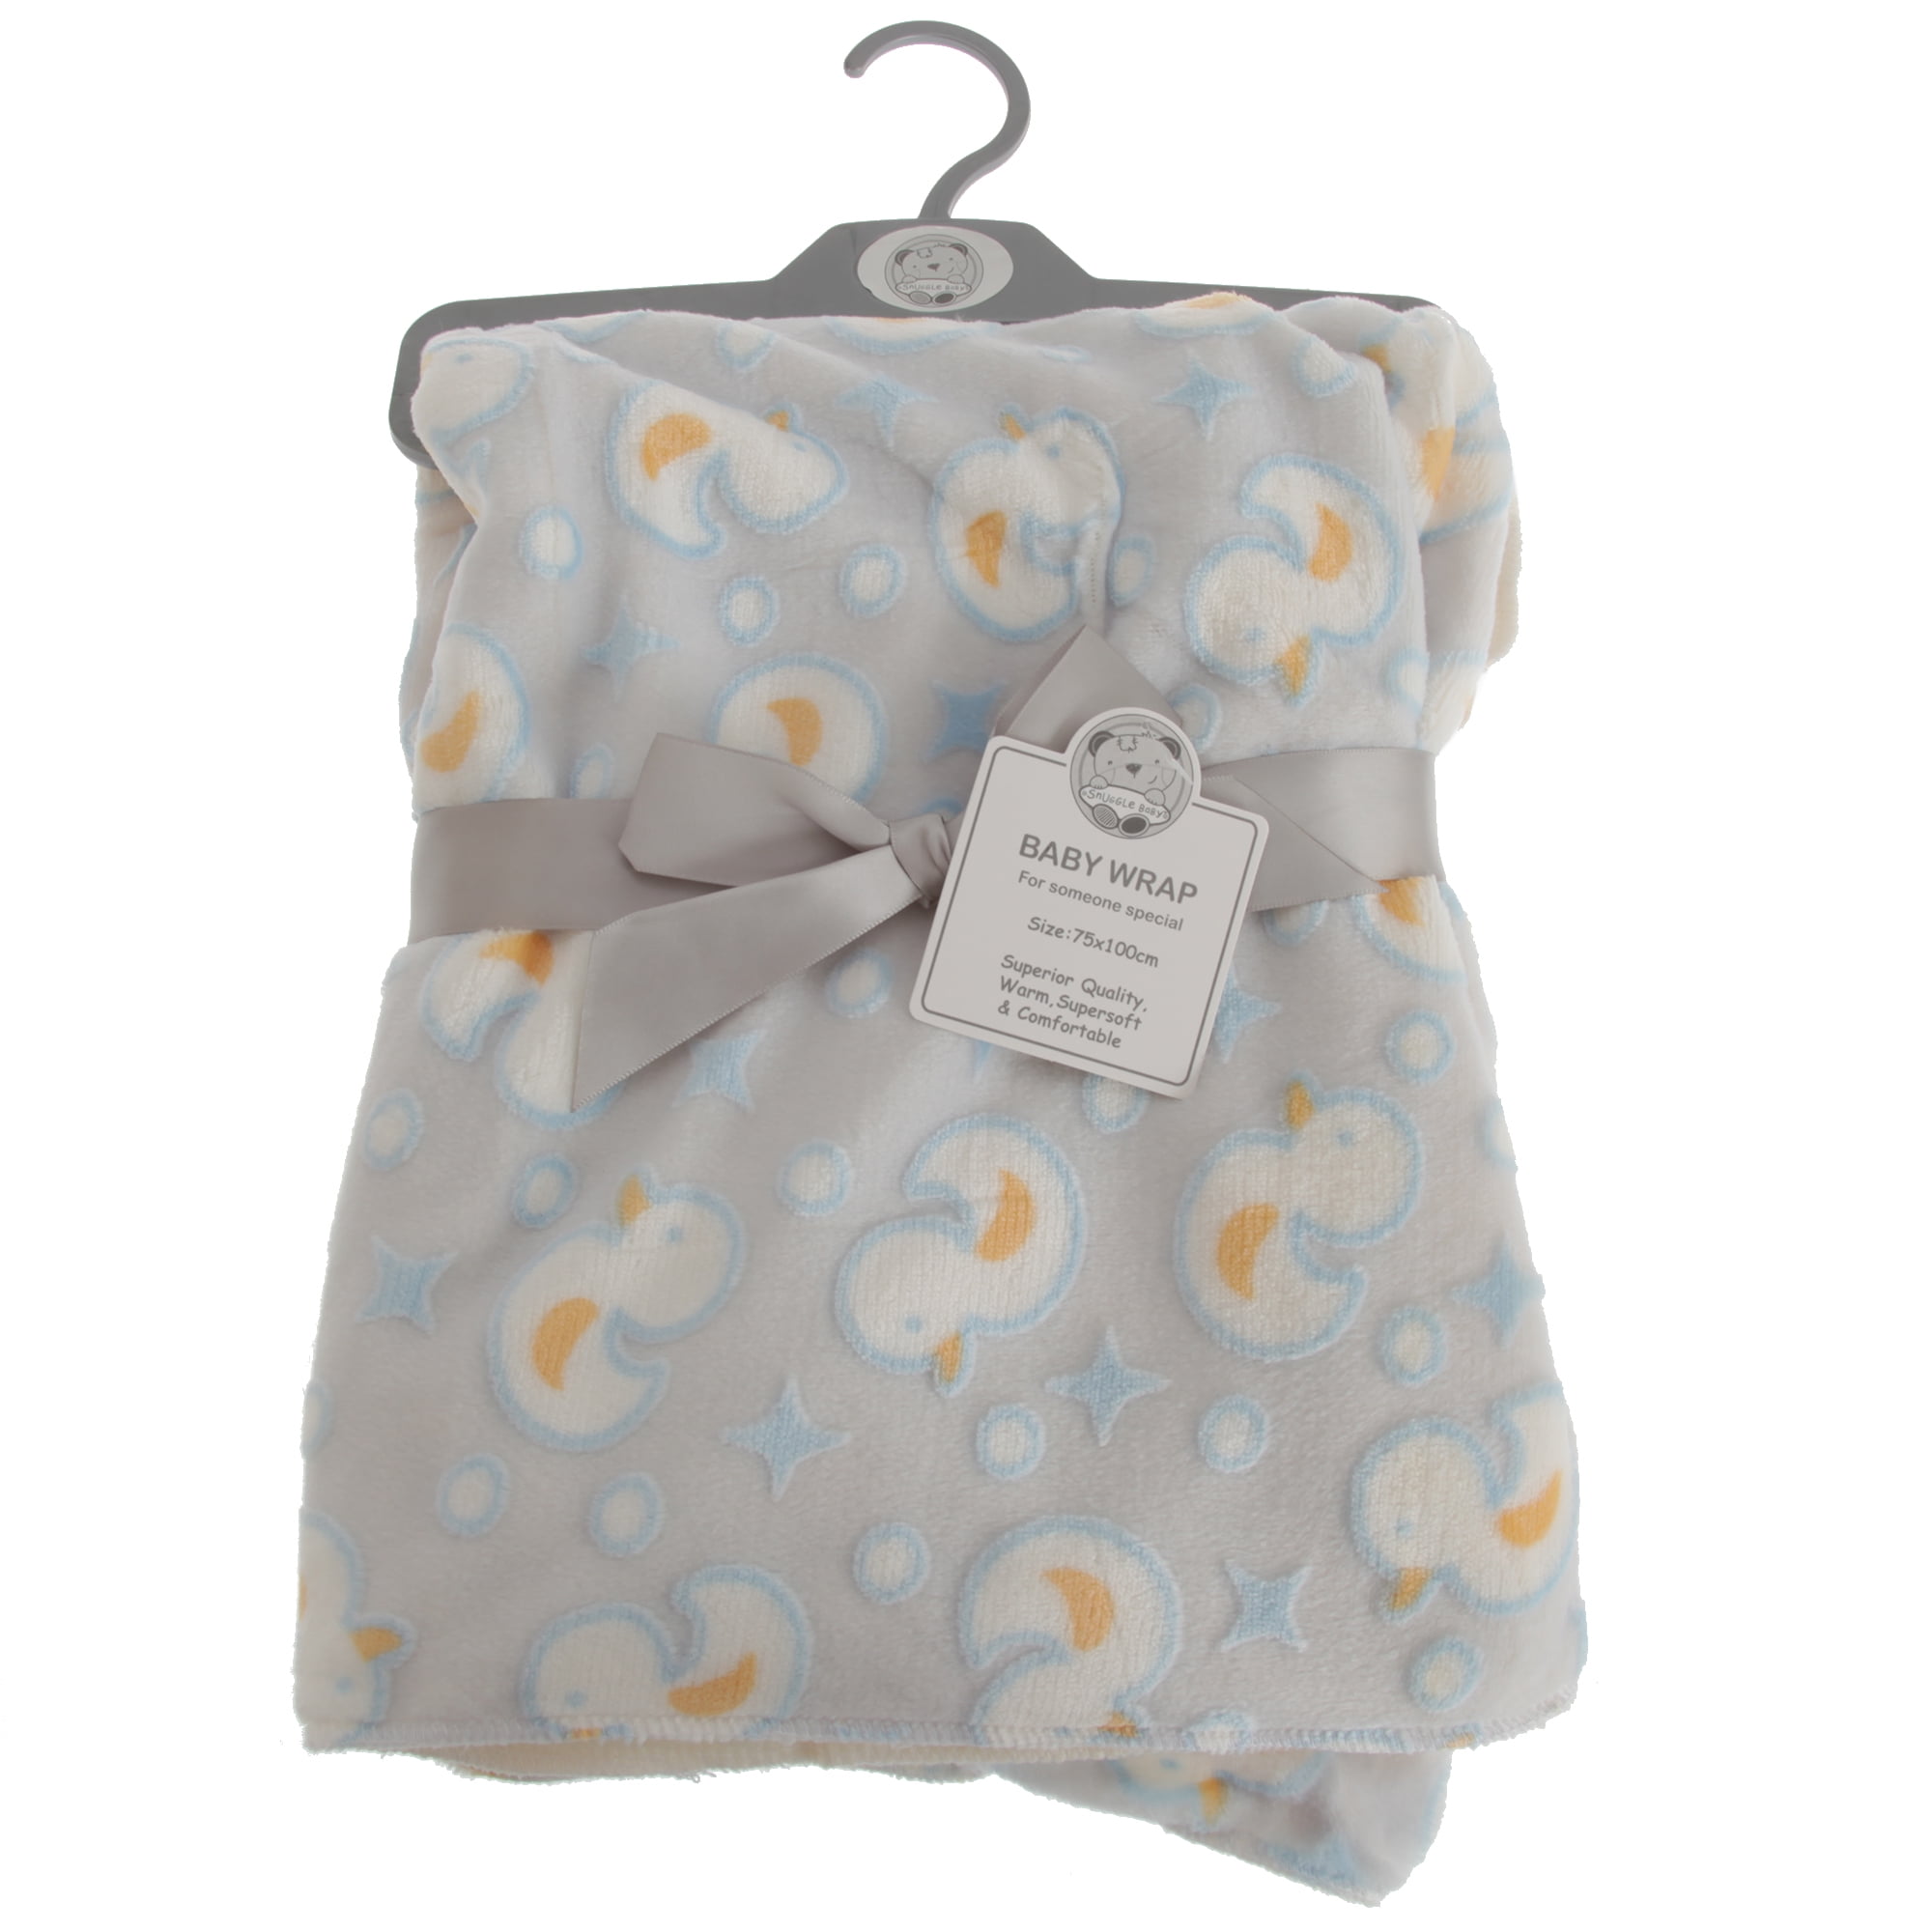 Brand new Snuggle Baby wrap/blanket in white with pink & grey hearts 75 x 100cm 